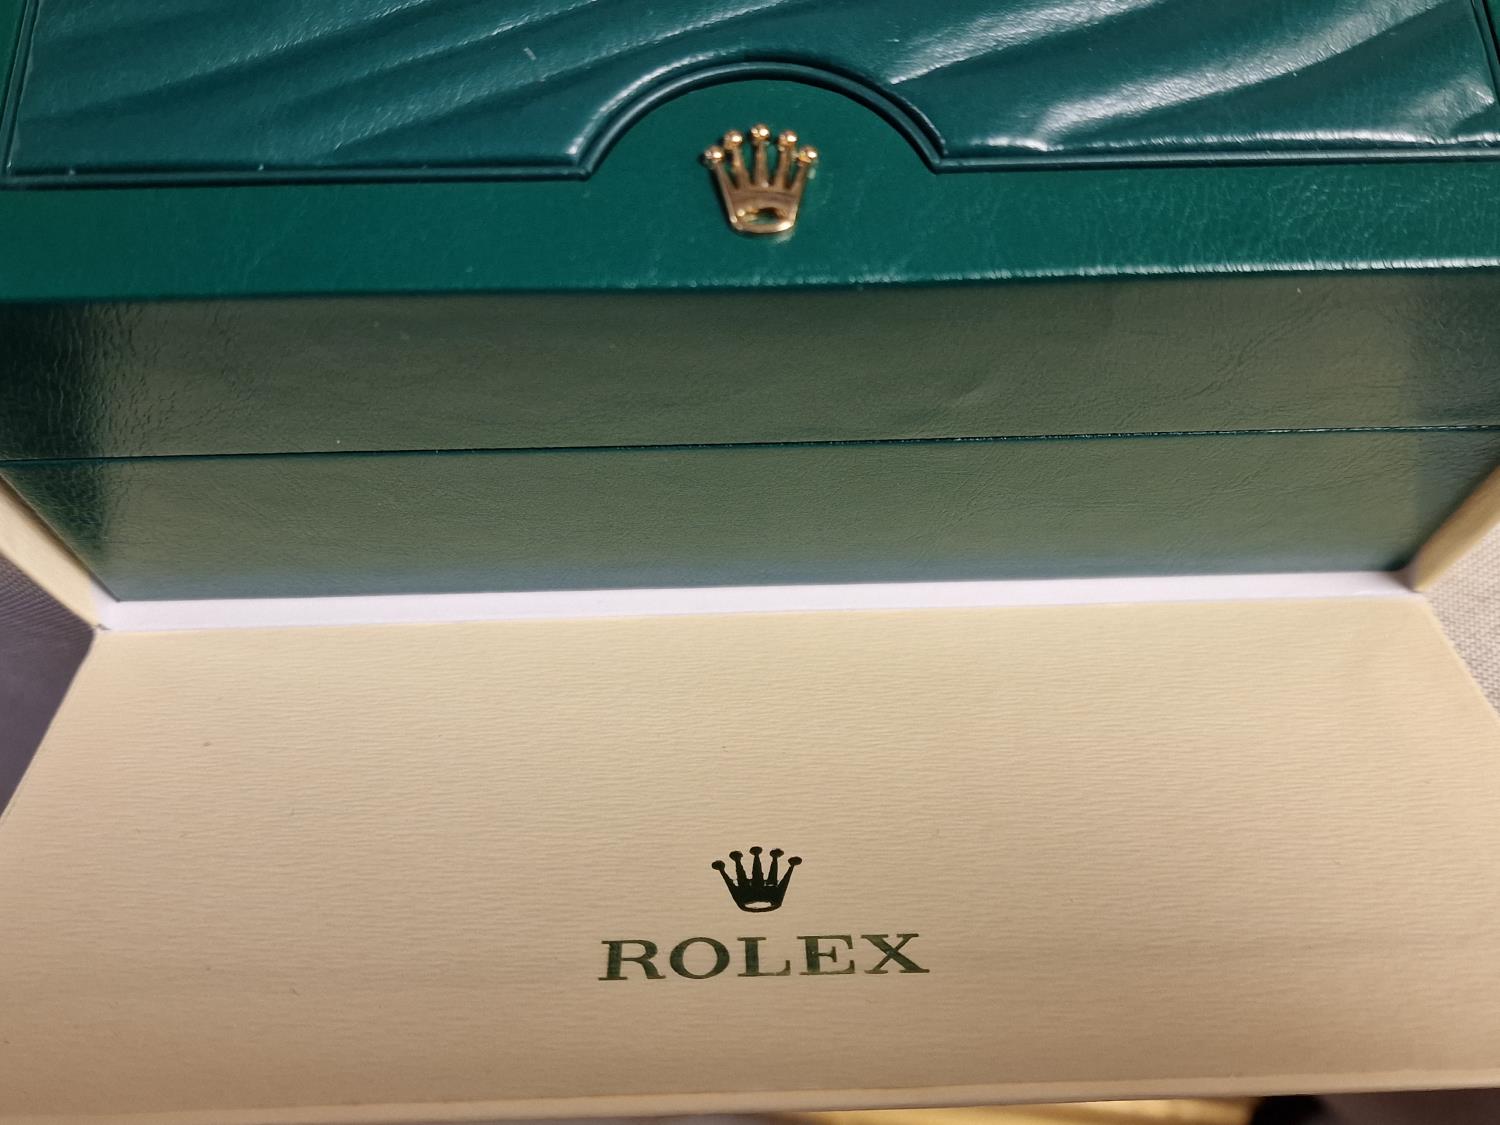 Boxed Rolex GMT II Chronometer Oyster Wrist Watch - Boxed with some paperwork - Image 11 of 11